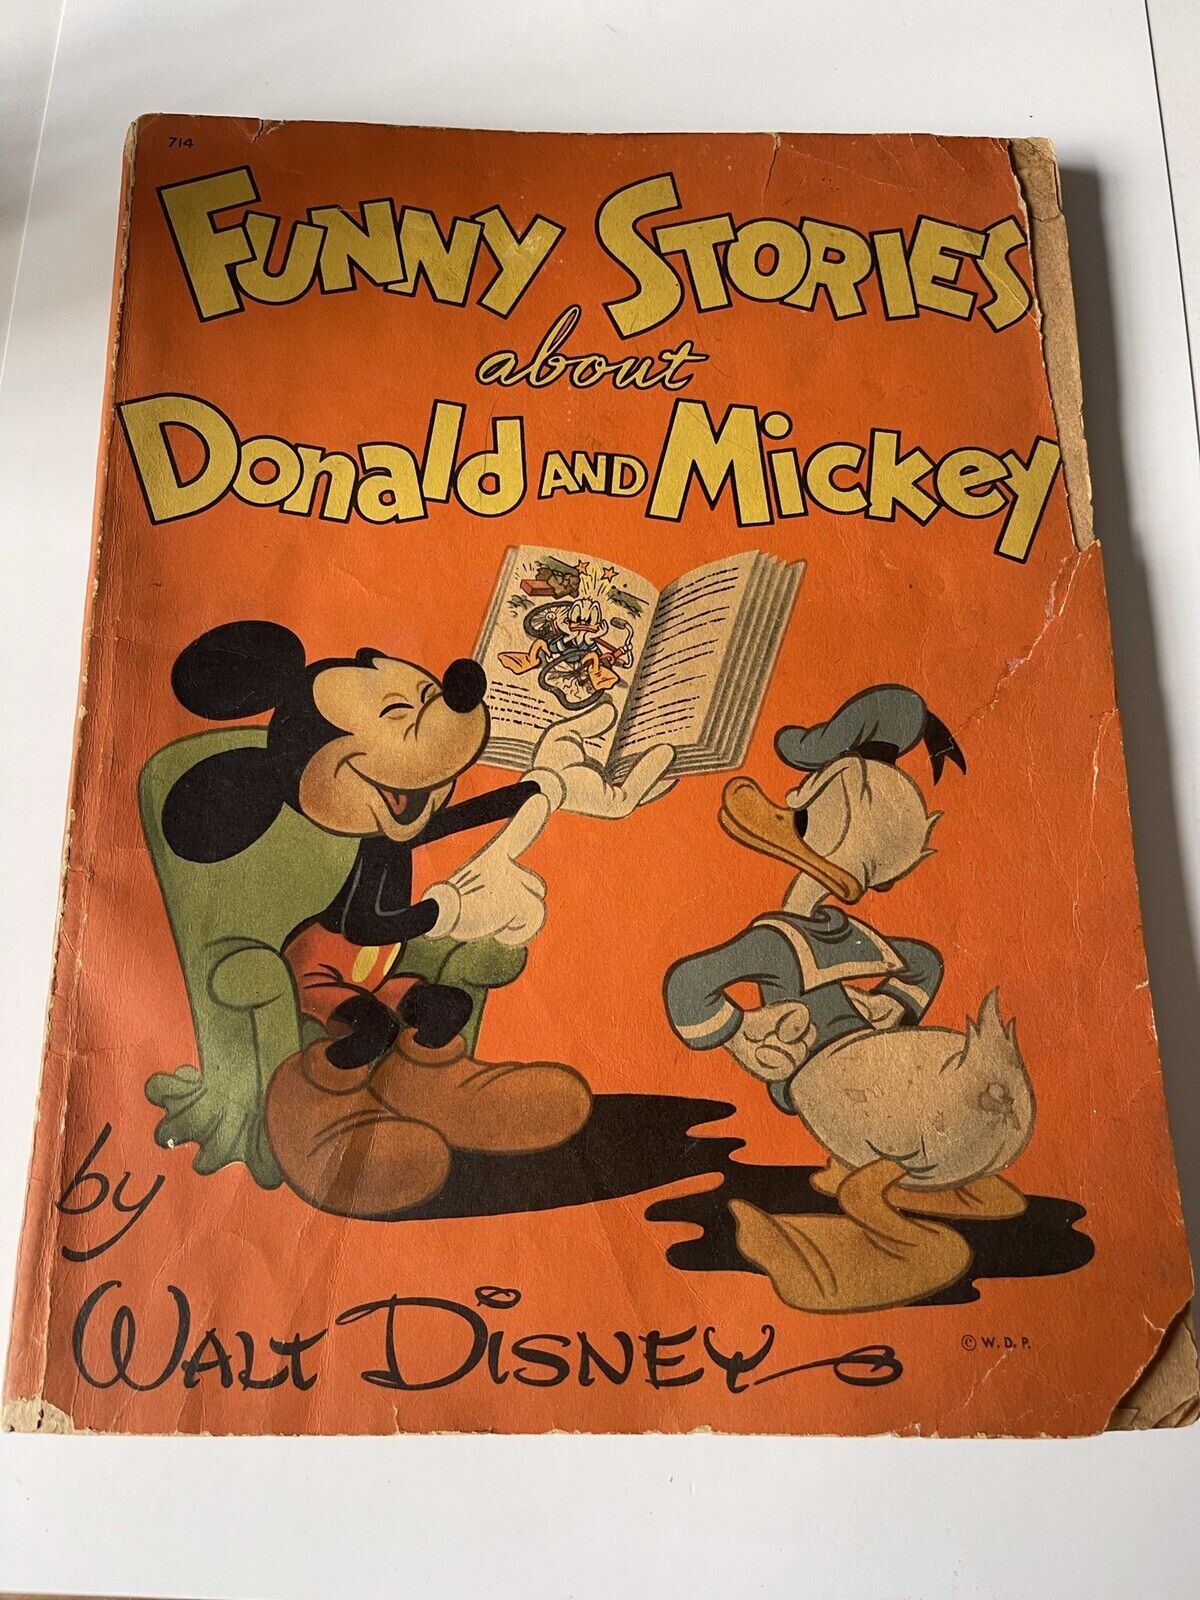 Funny Stories About Donald and Mickey #714 1945-Wal Disney-128 pages-VG-